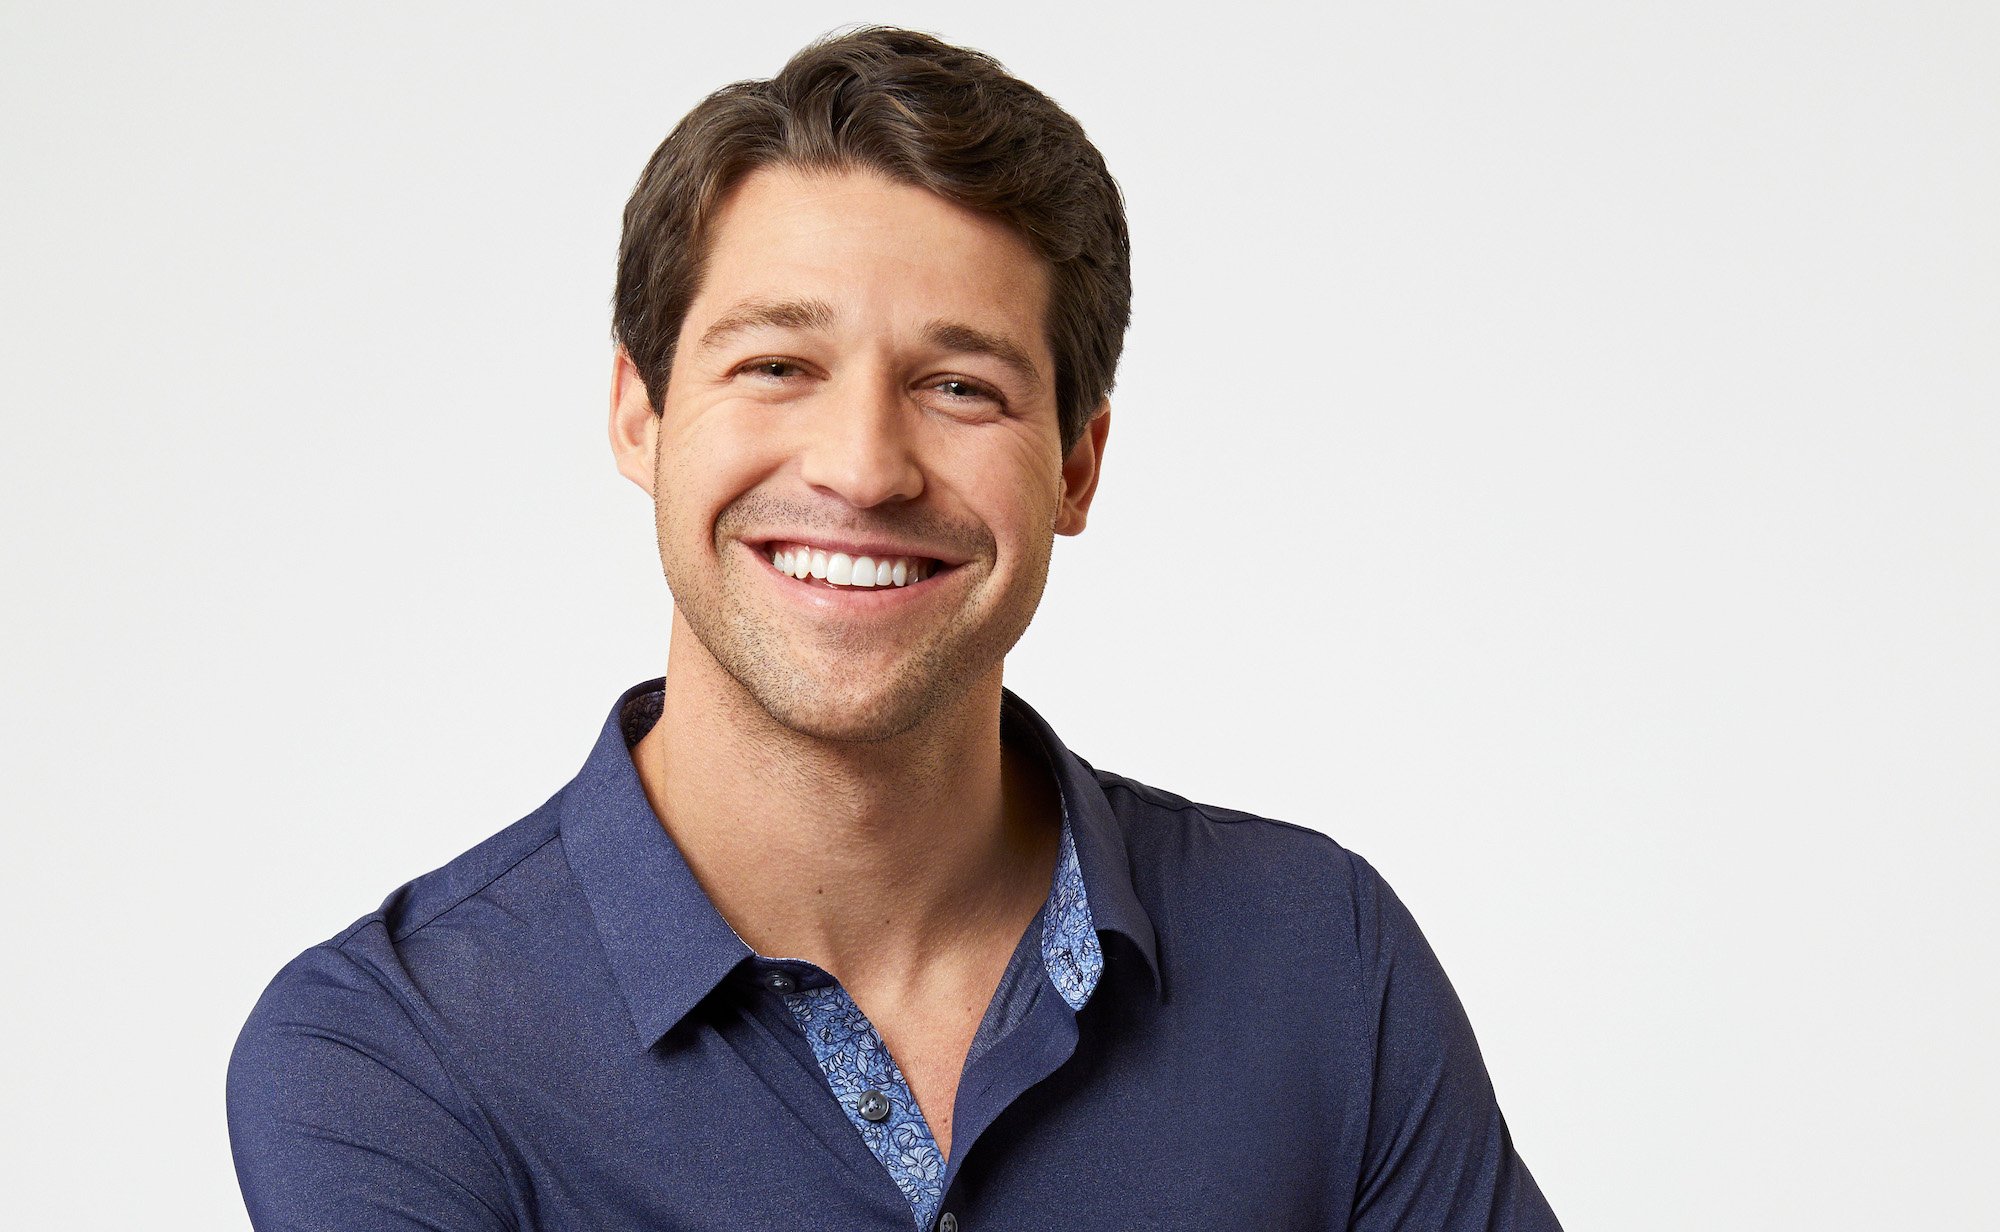 'The Bachelorette' 2022 contestant Hayden Markowitz wearing a navy collared shirt.